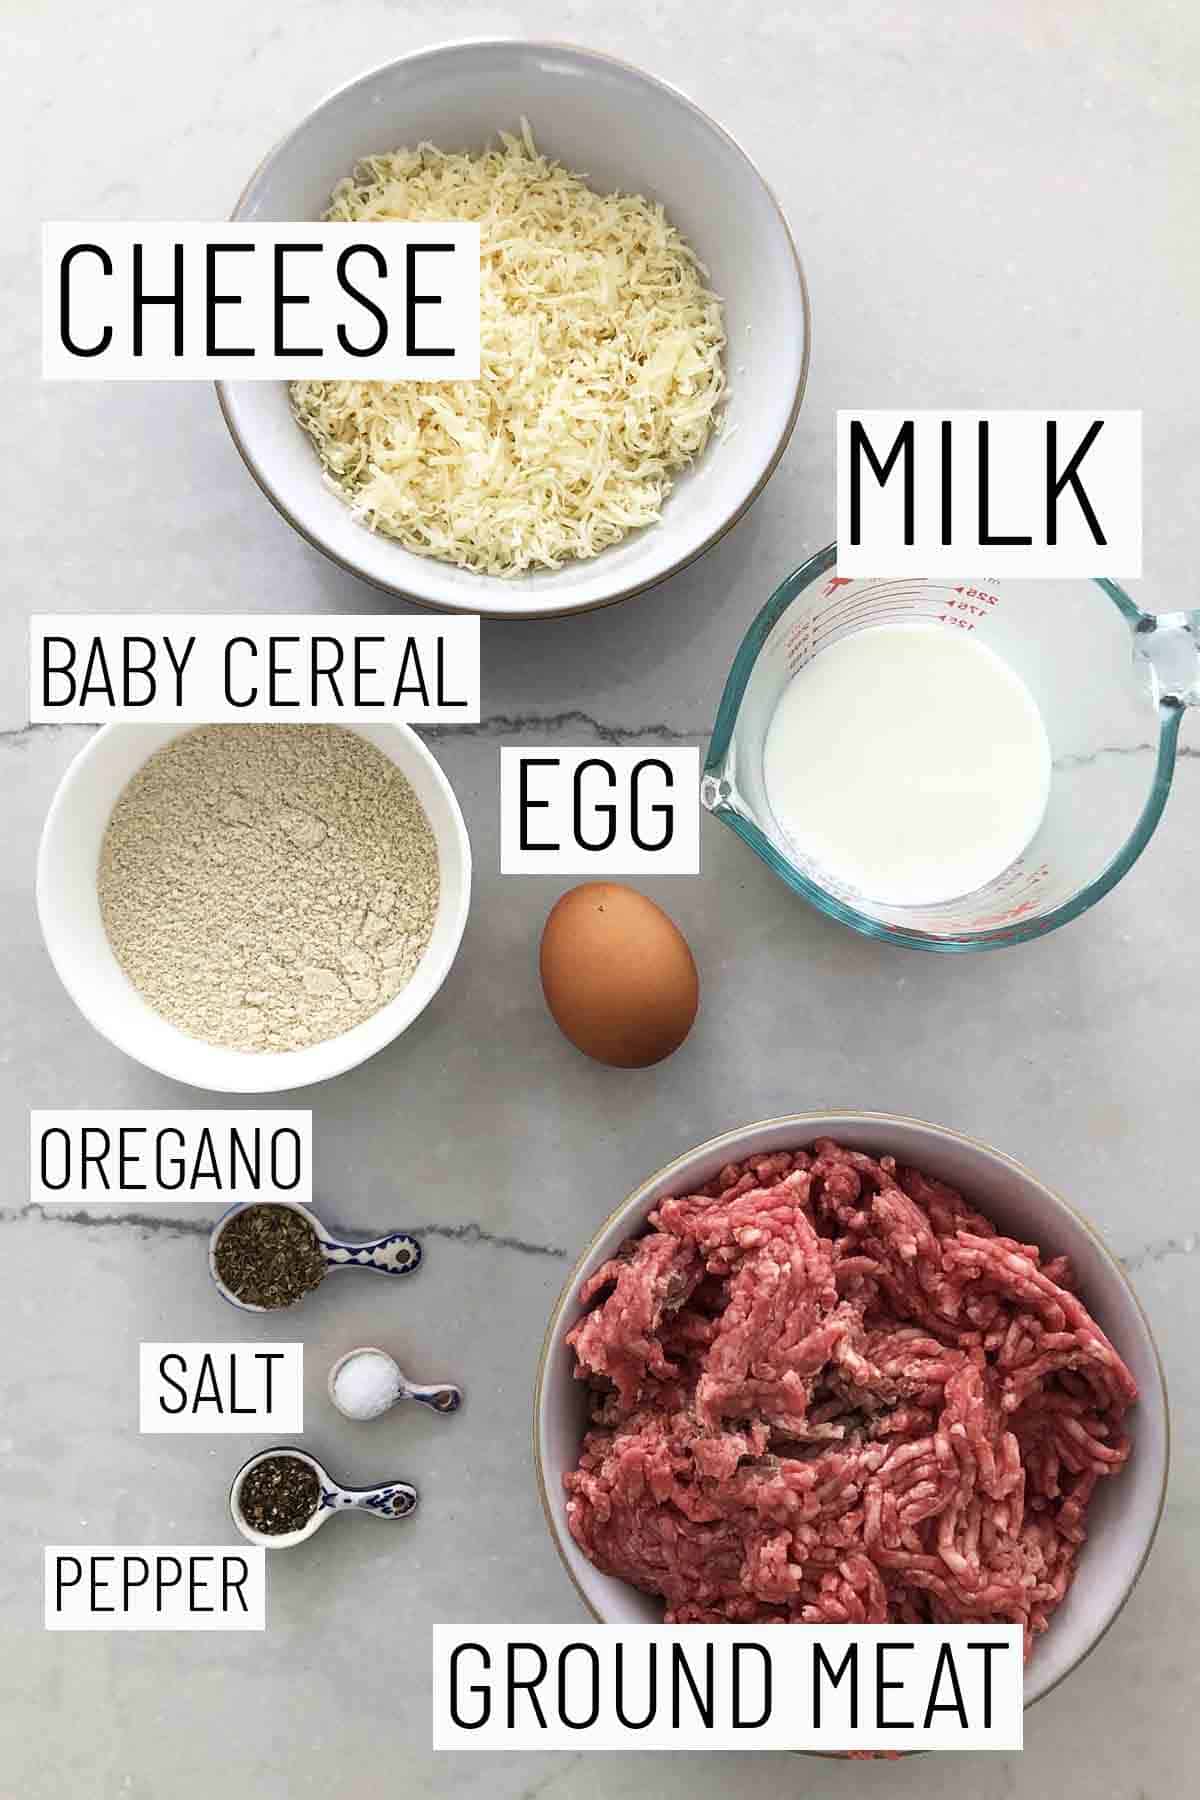 Flat lay image of portioned recipe ingredients including ground meat, pepper, salt, oregano, baby cereal, egg, milk, and cheese. 